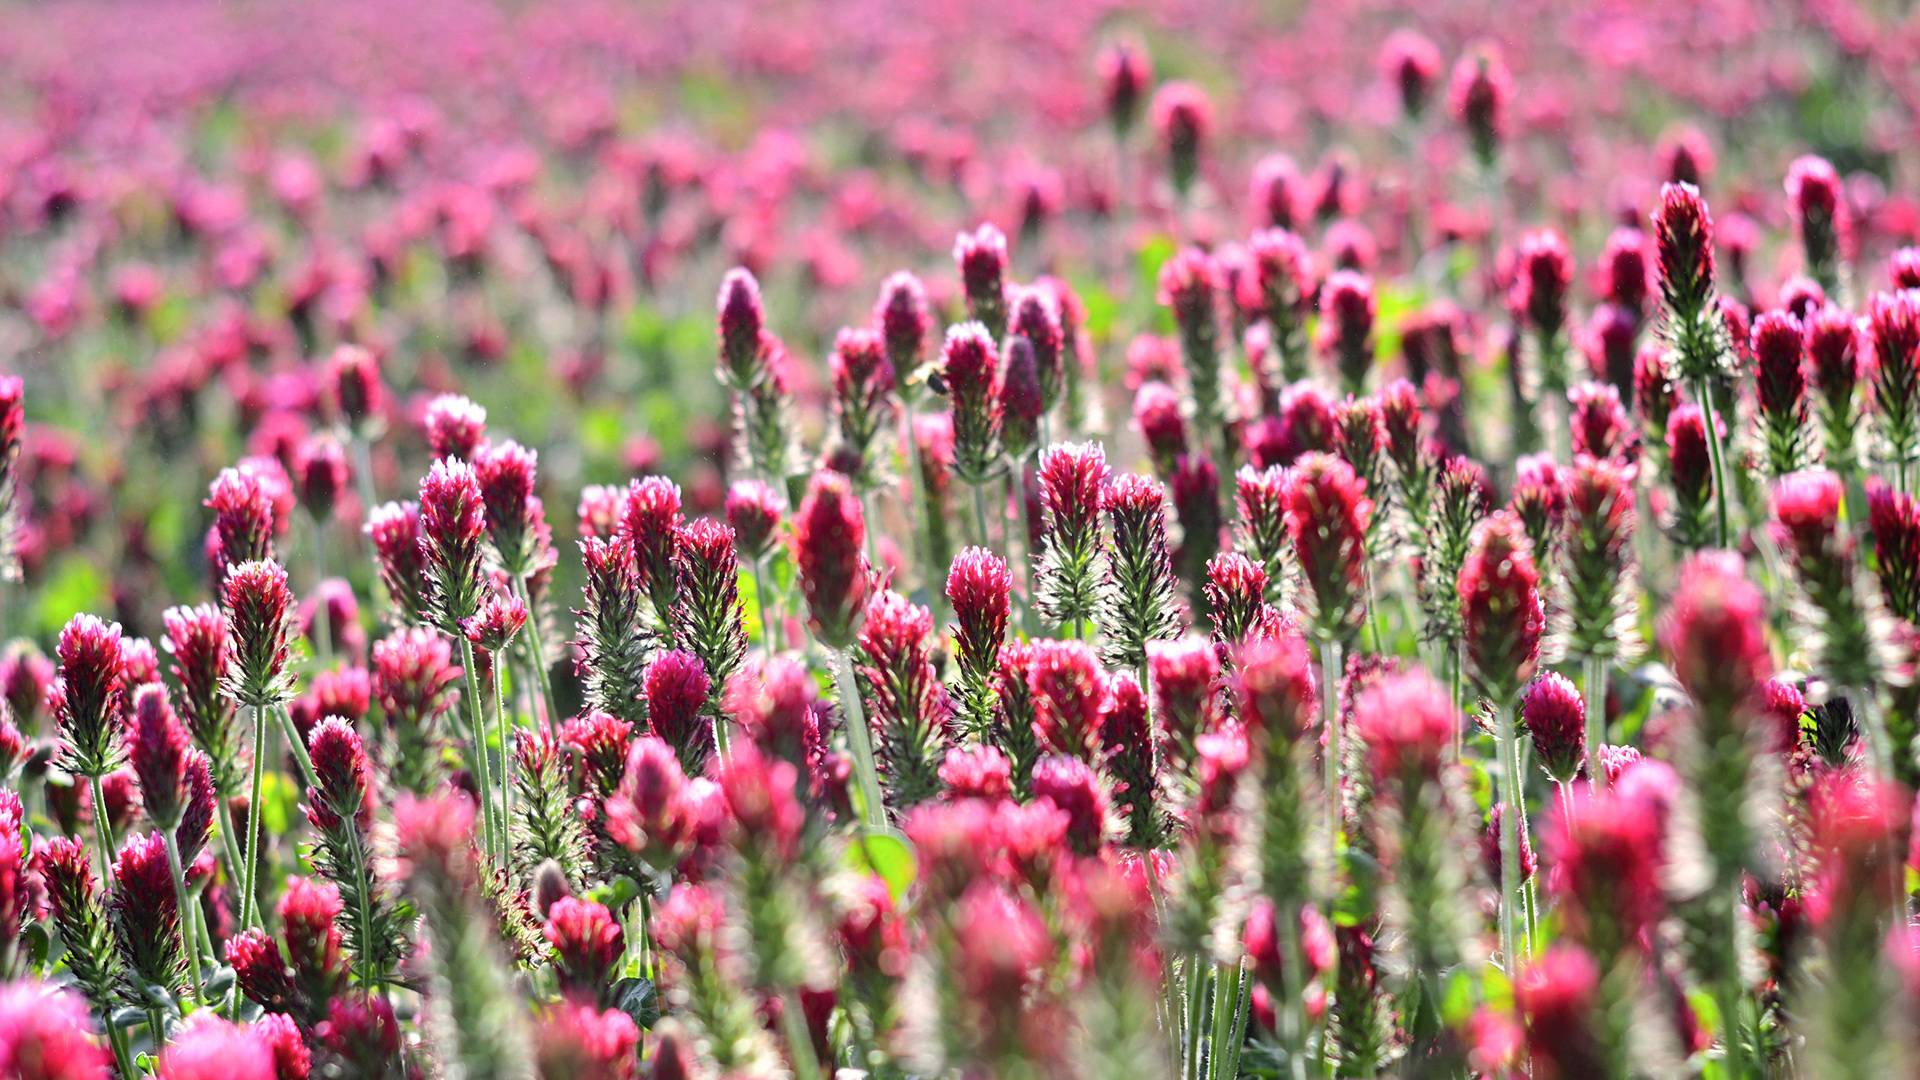 Field of red clover